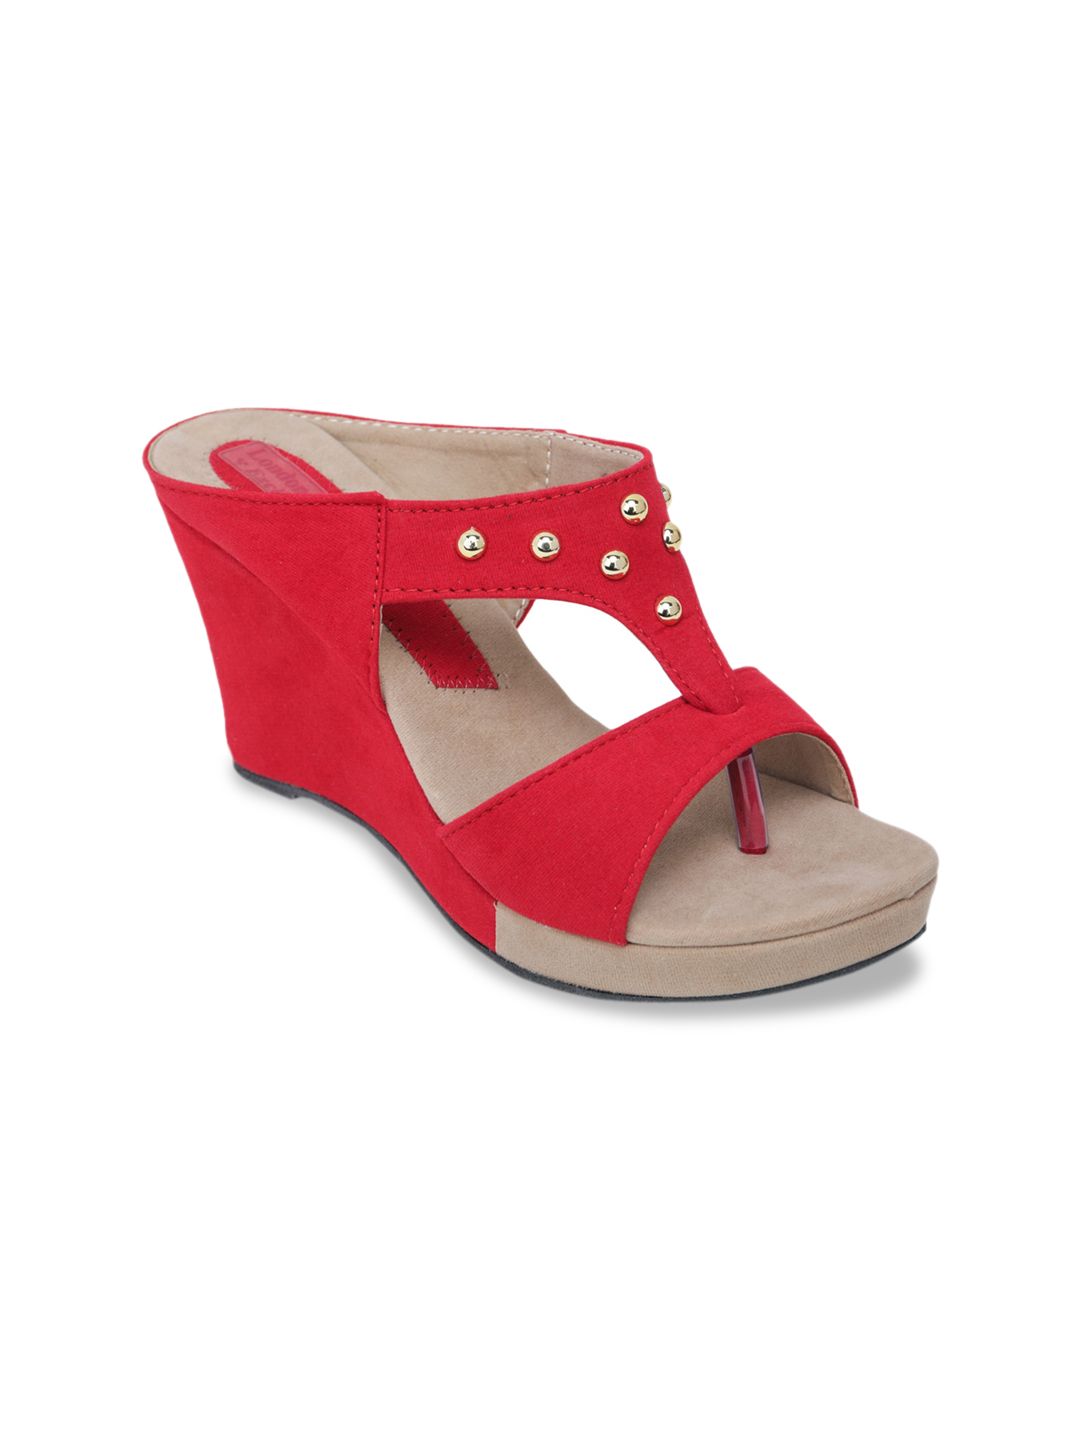 LONDON STEPS Women Red & Beige Colourblocked Wedges Price in India